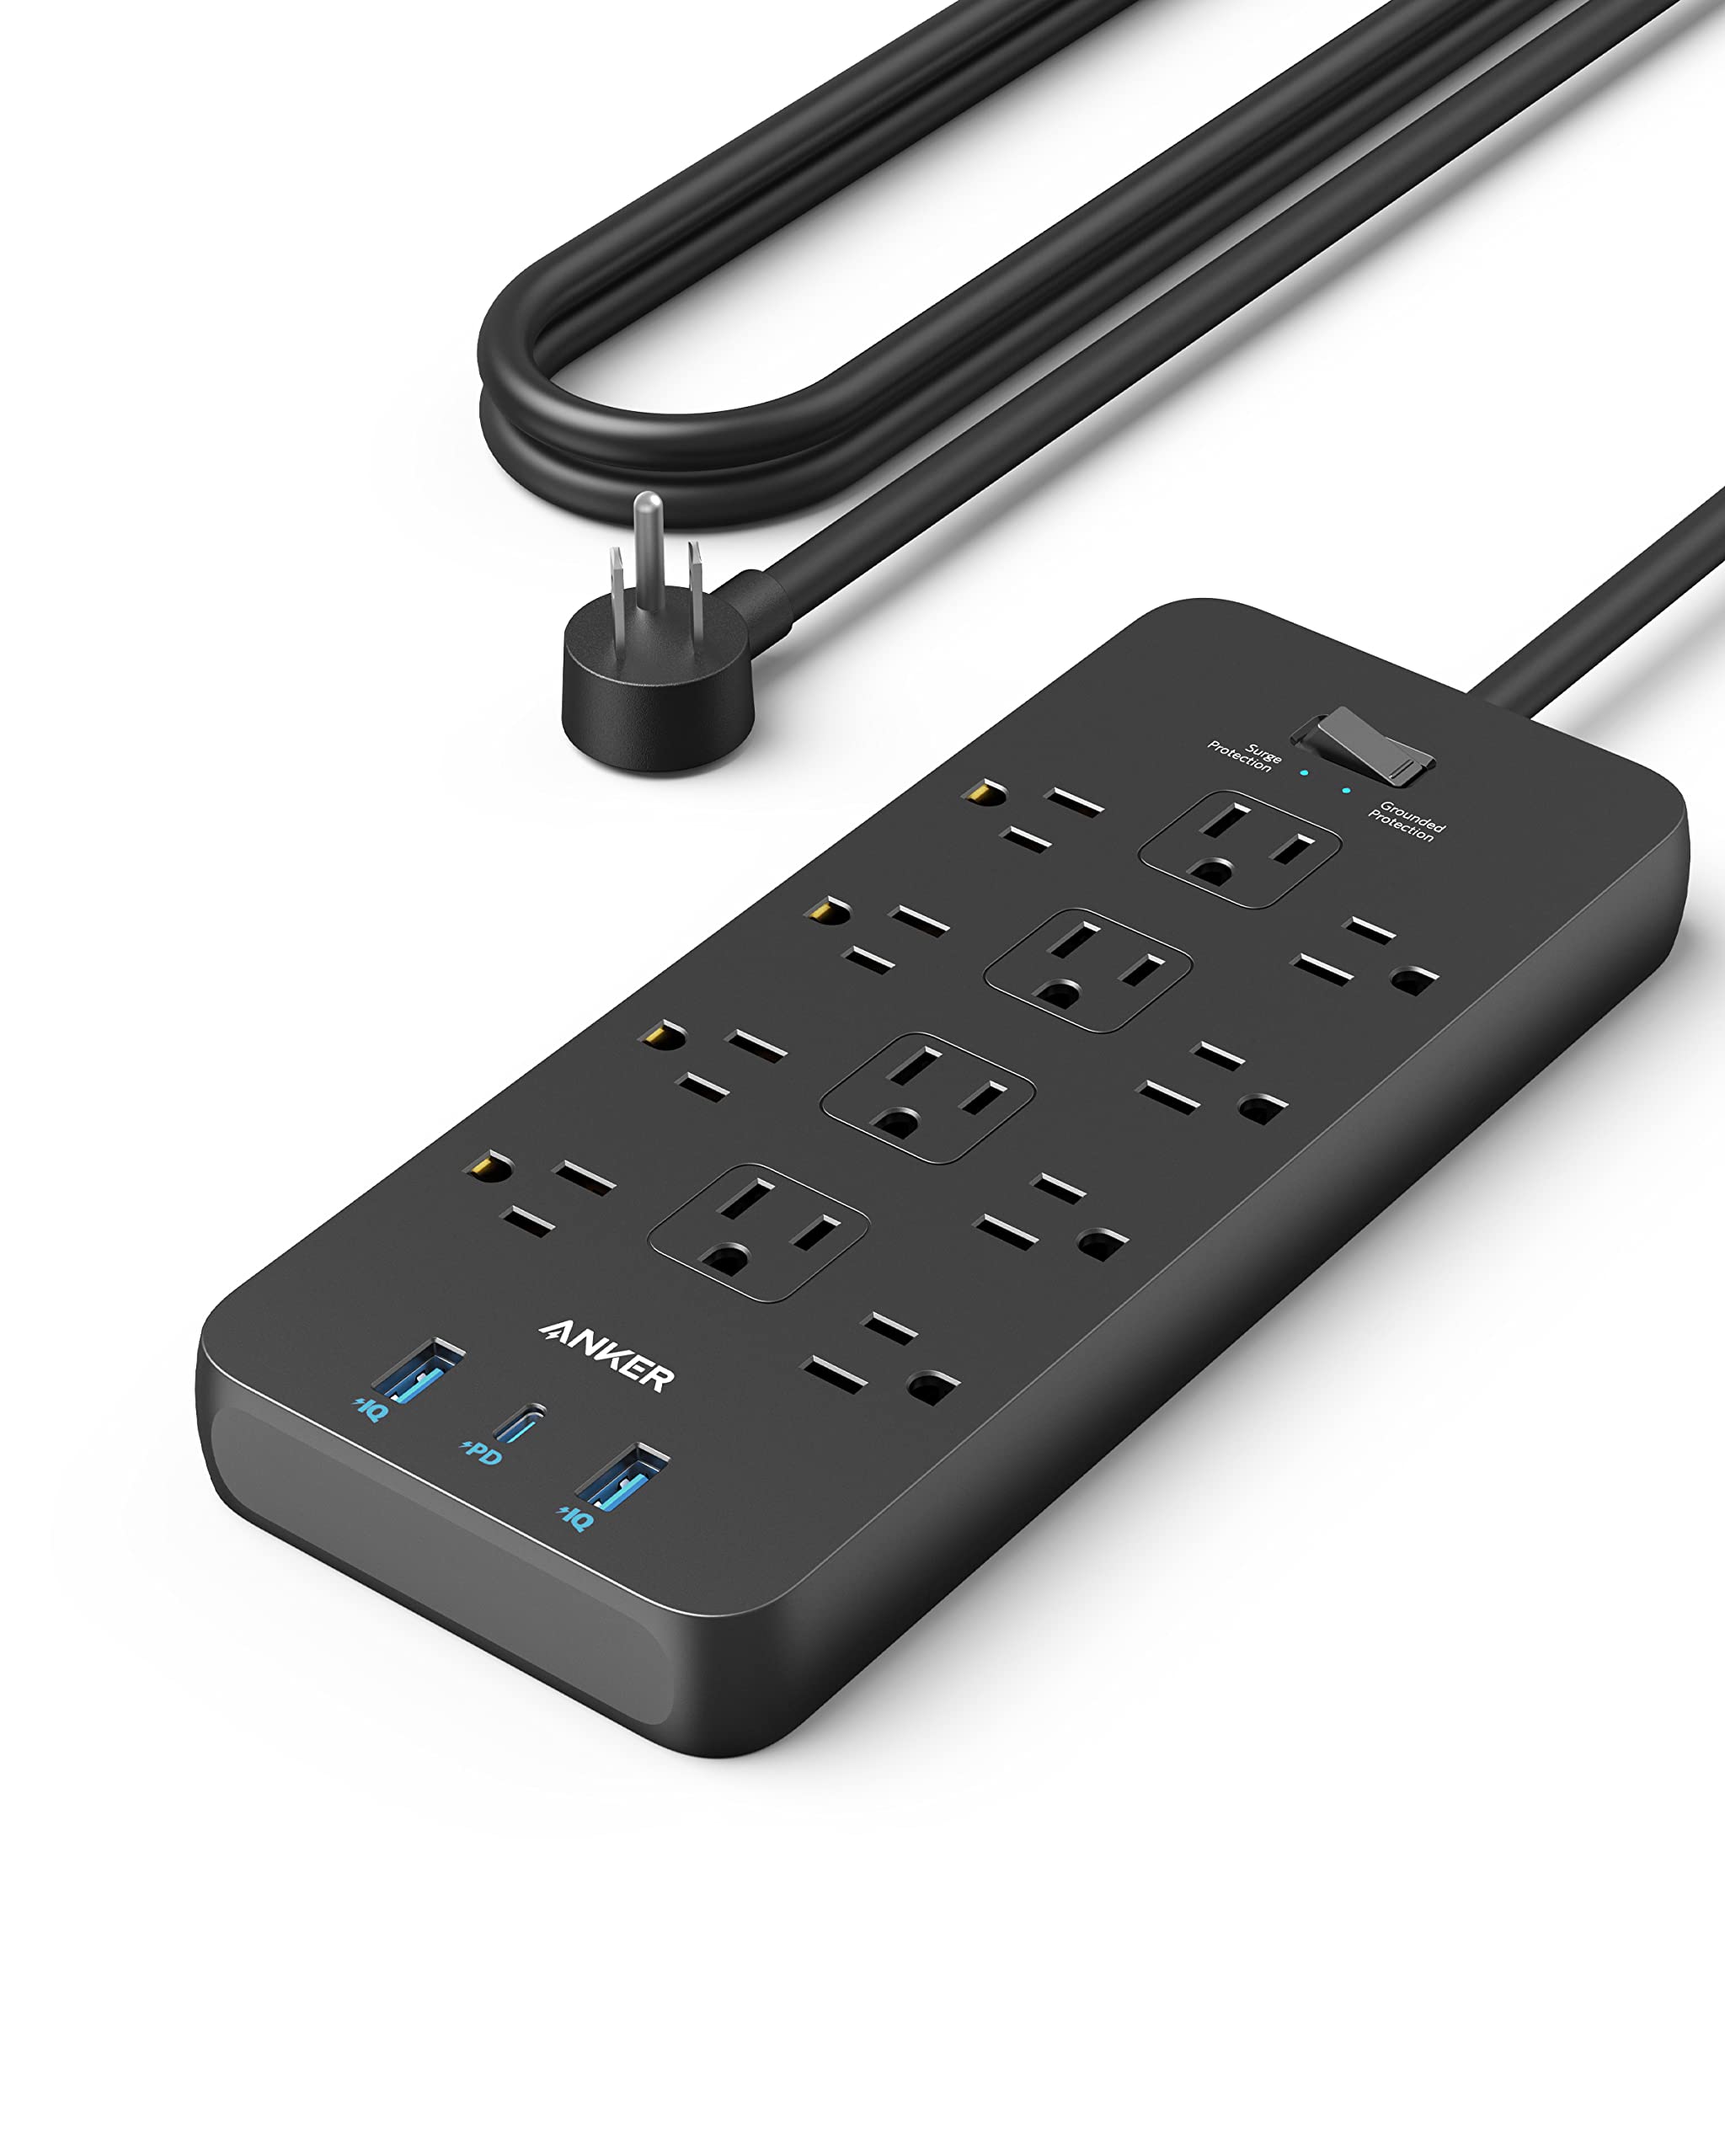 Anker Power Strip 2100J 12-Outlet Surge Protector w/ 2x USB A + 1 USB C Port (Black) $22 + Free Shipping w/ Prime or on $35+